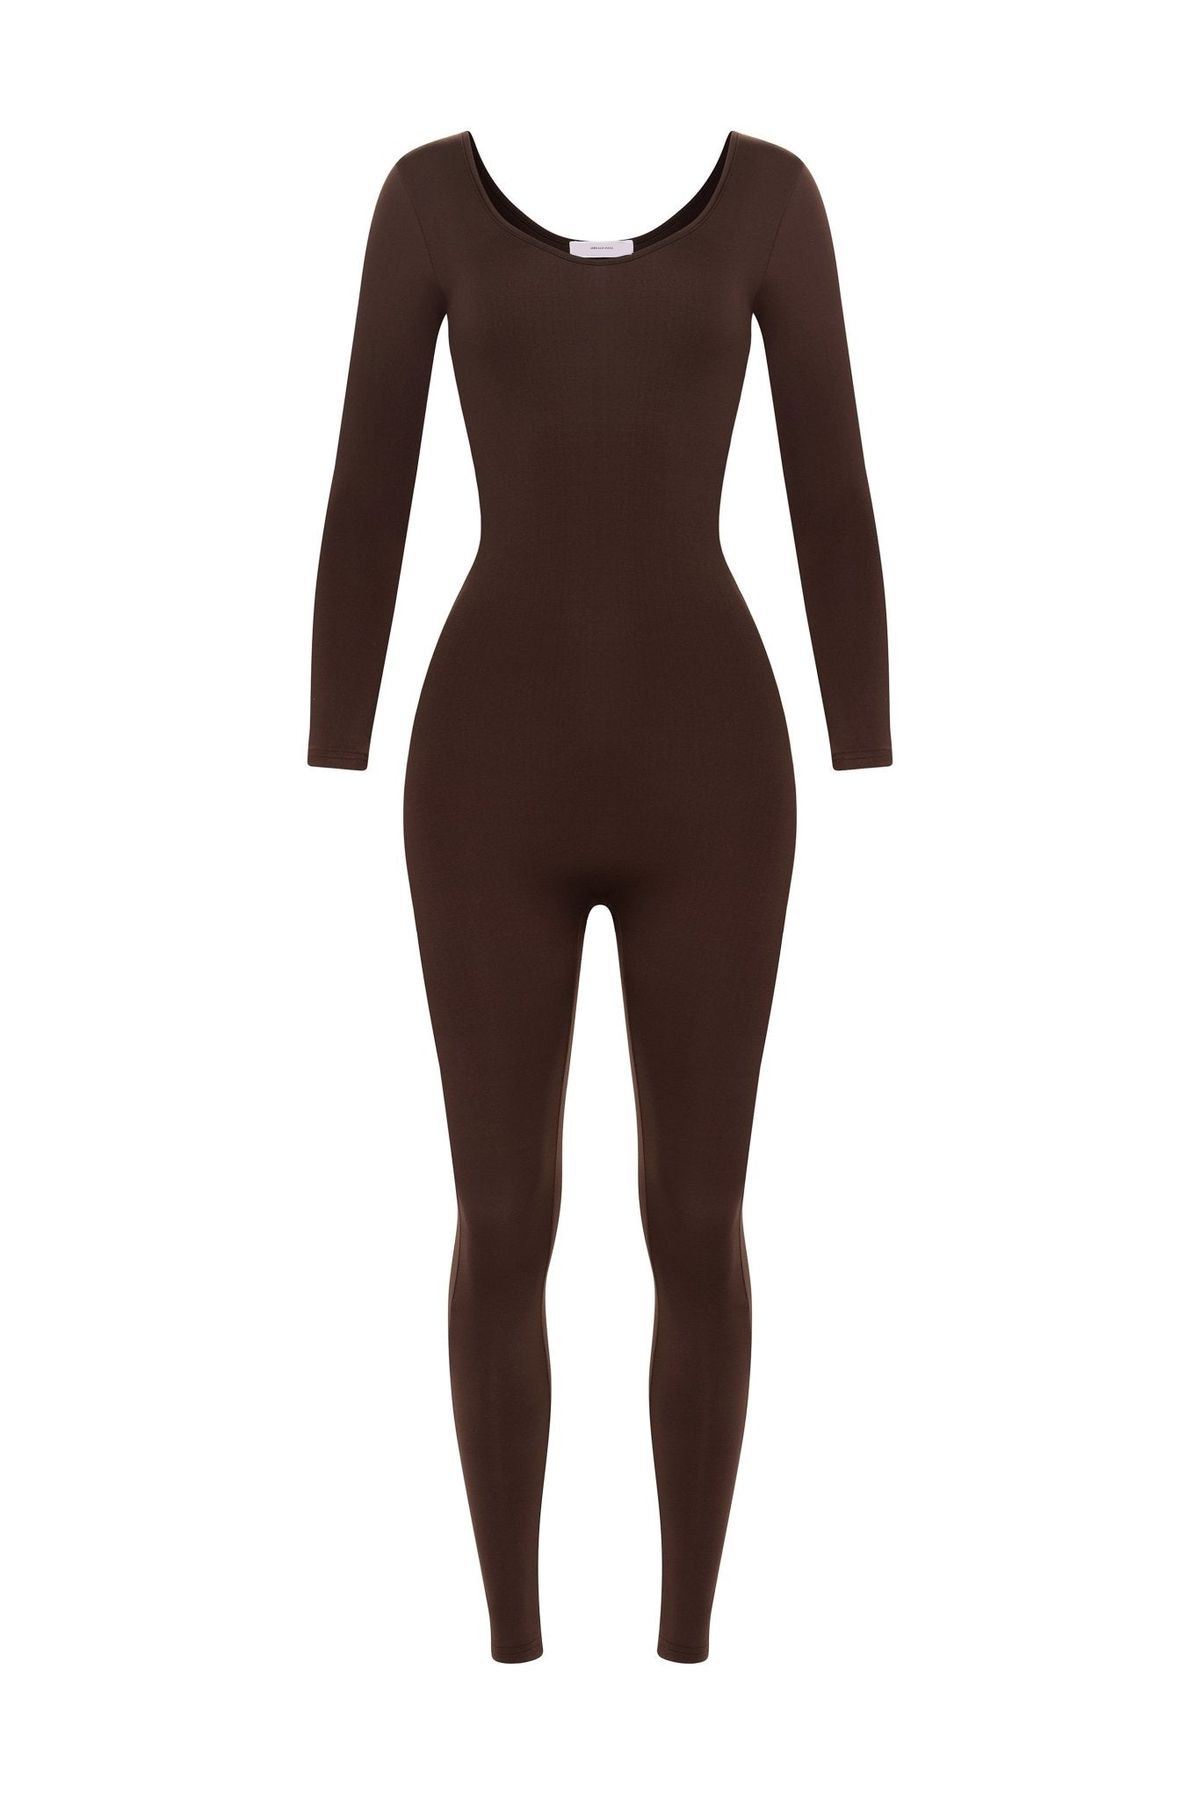 A&A Body all Jumpsuit